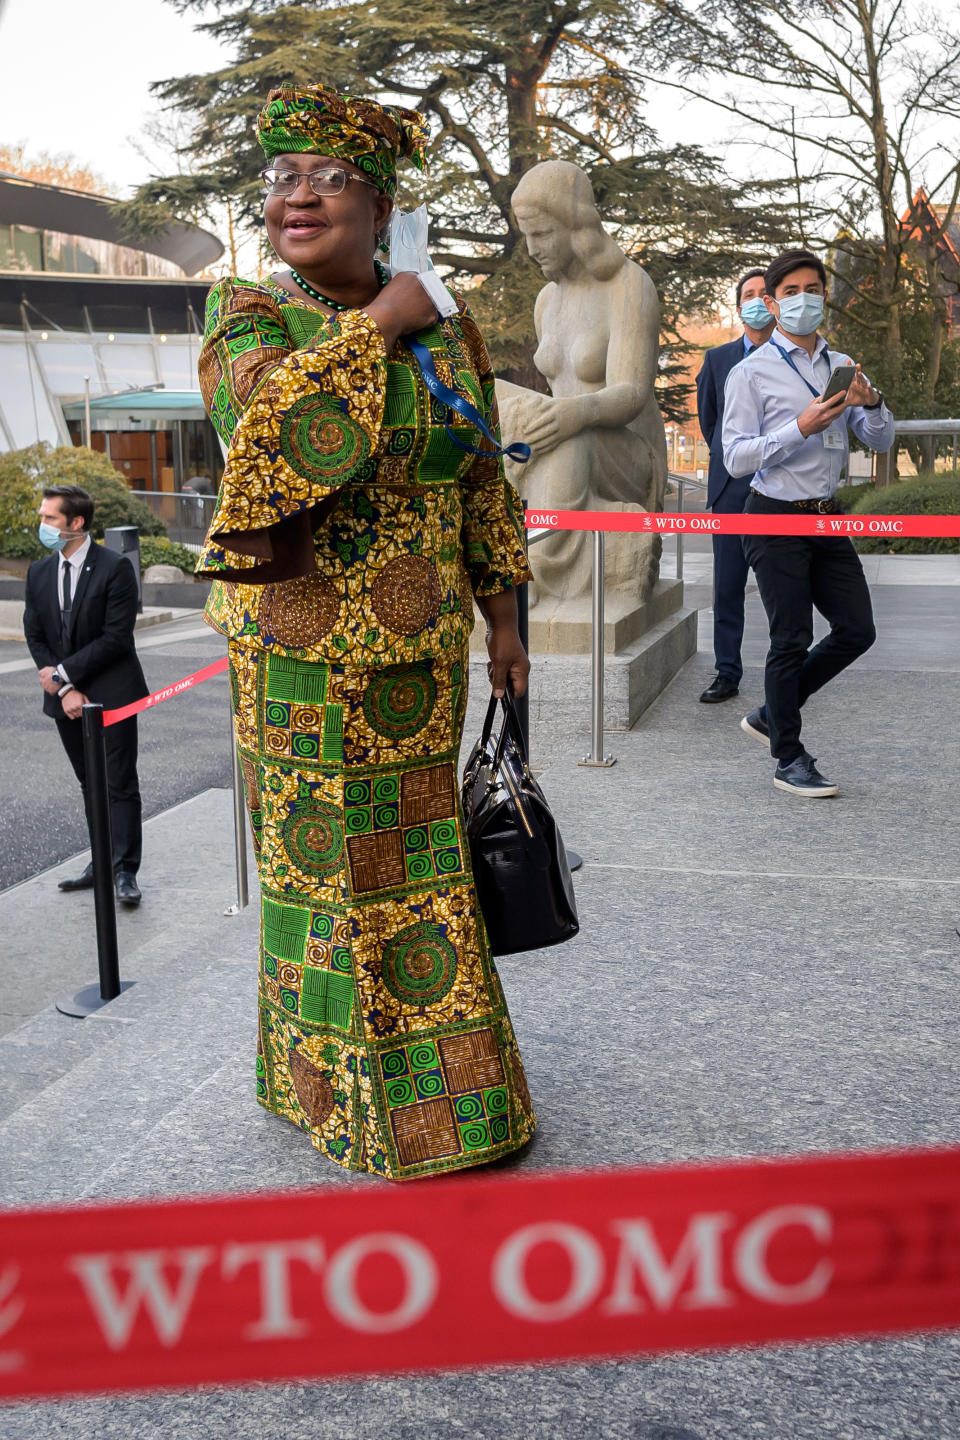 New Director-General of the World Trade Organisation (WTO) Ngozi Okonjo-Iweala arrives at the WTO headquarters to takes office in Geneva, Switzerland, Monday, March 1, 2021. Nigeria's Ngozi Okonjo-Iweala takes the reins of the WTO amid hope she will infuse the beleaguered body with fresh momentum to address towering challenges and a pandemic-fuelled global economic crisis. (Fabrice Coffrini/Pool/Keystone via AP)